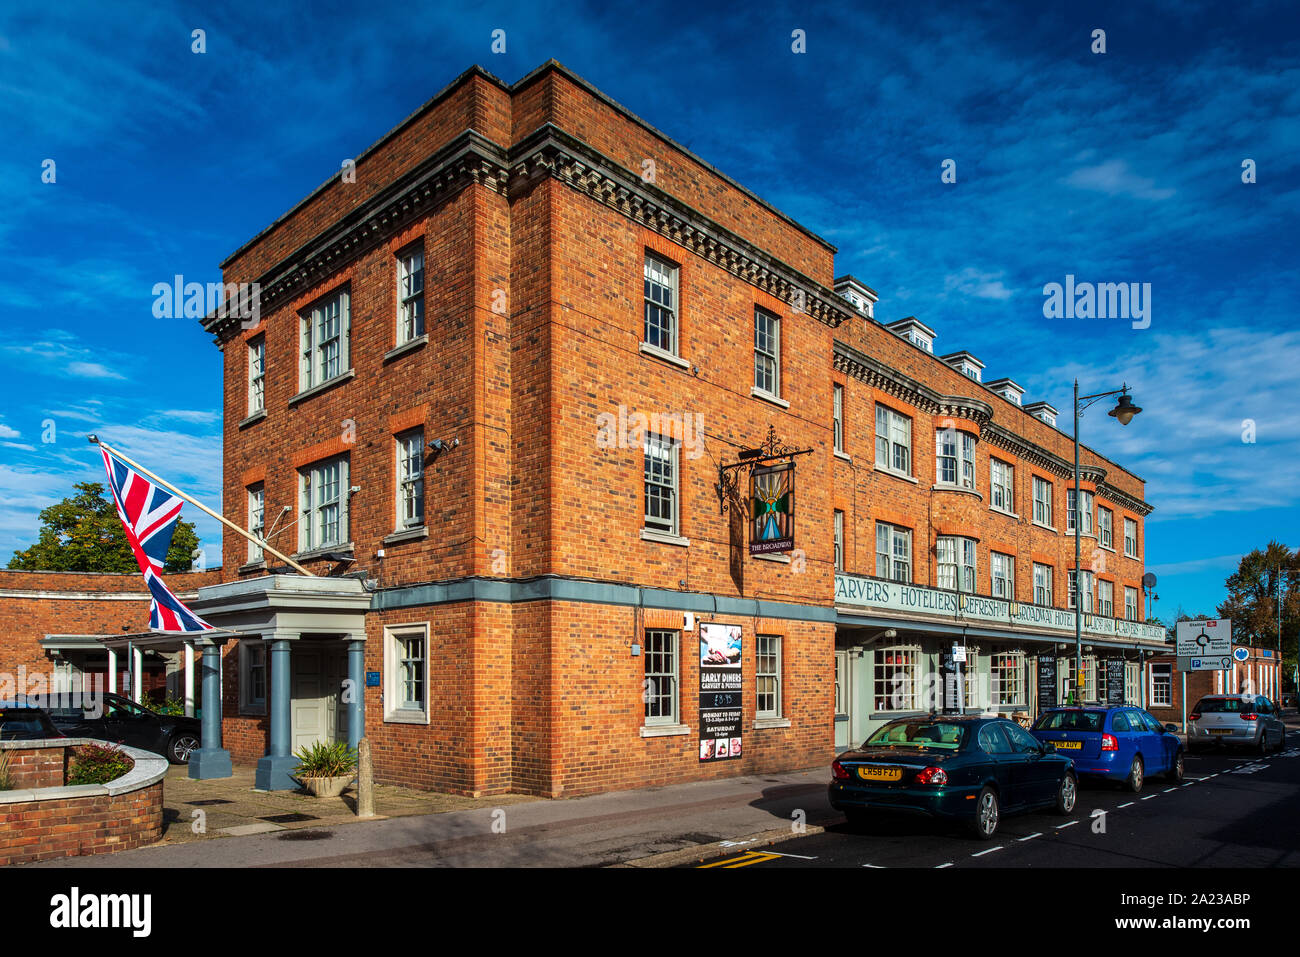 Broadway Hotel in the centre of Letchworth Garden City, Herts UK. Built in 1961it was the first licensed premises in Letchworth Garden City. Stock Photo